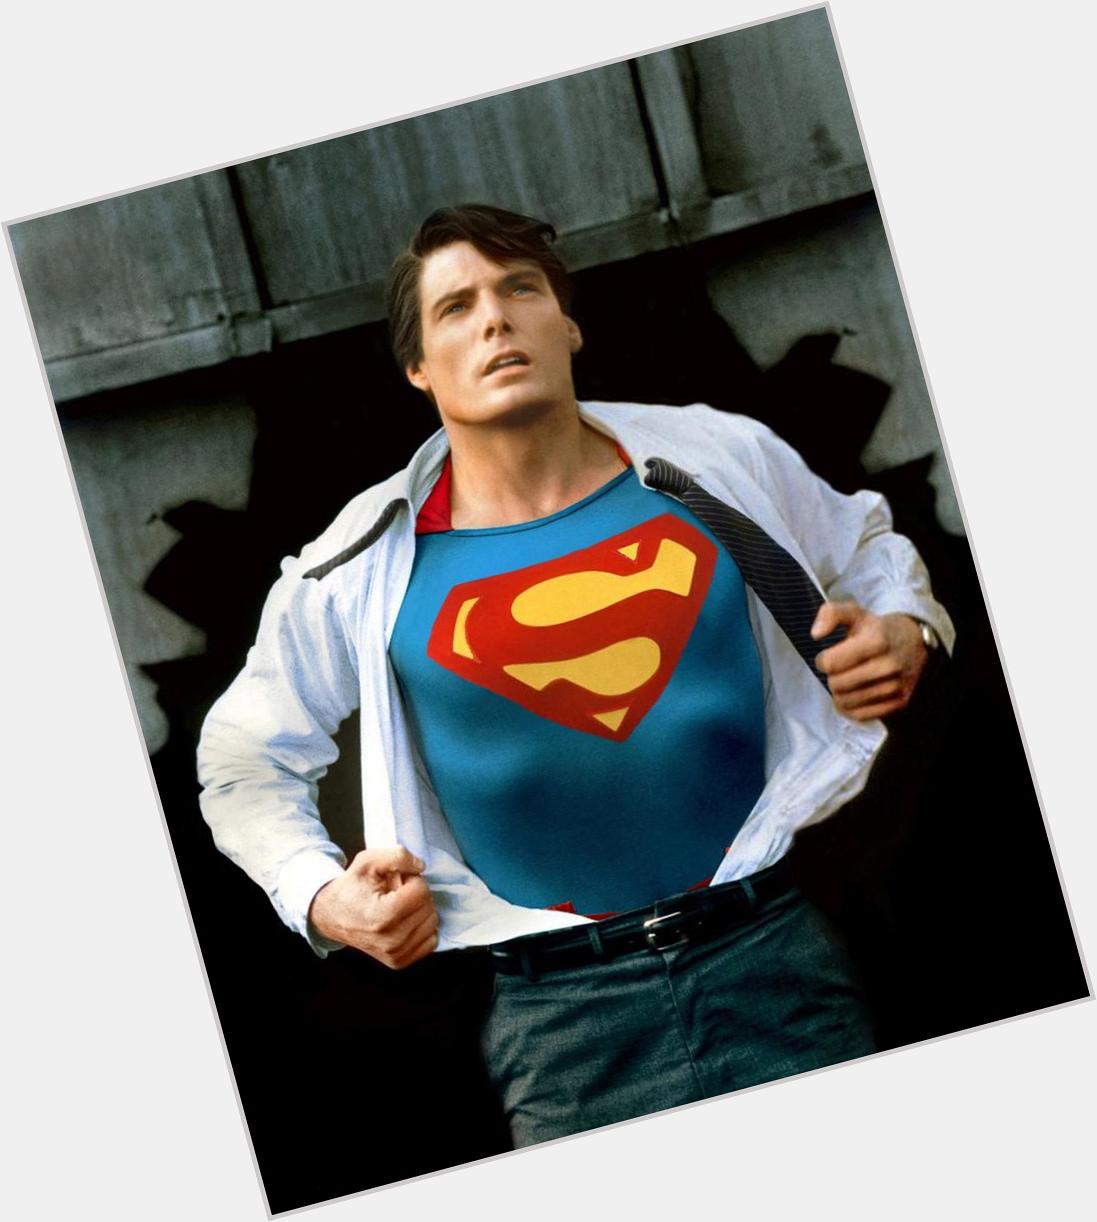 Happy birthday christopher reeve, may your beautiful soul rest in peace. 